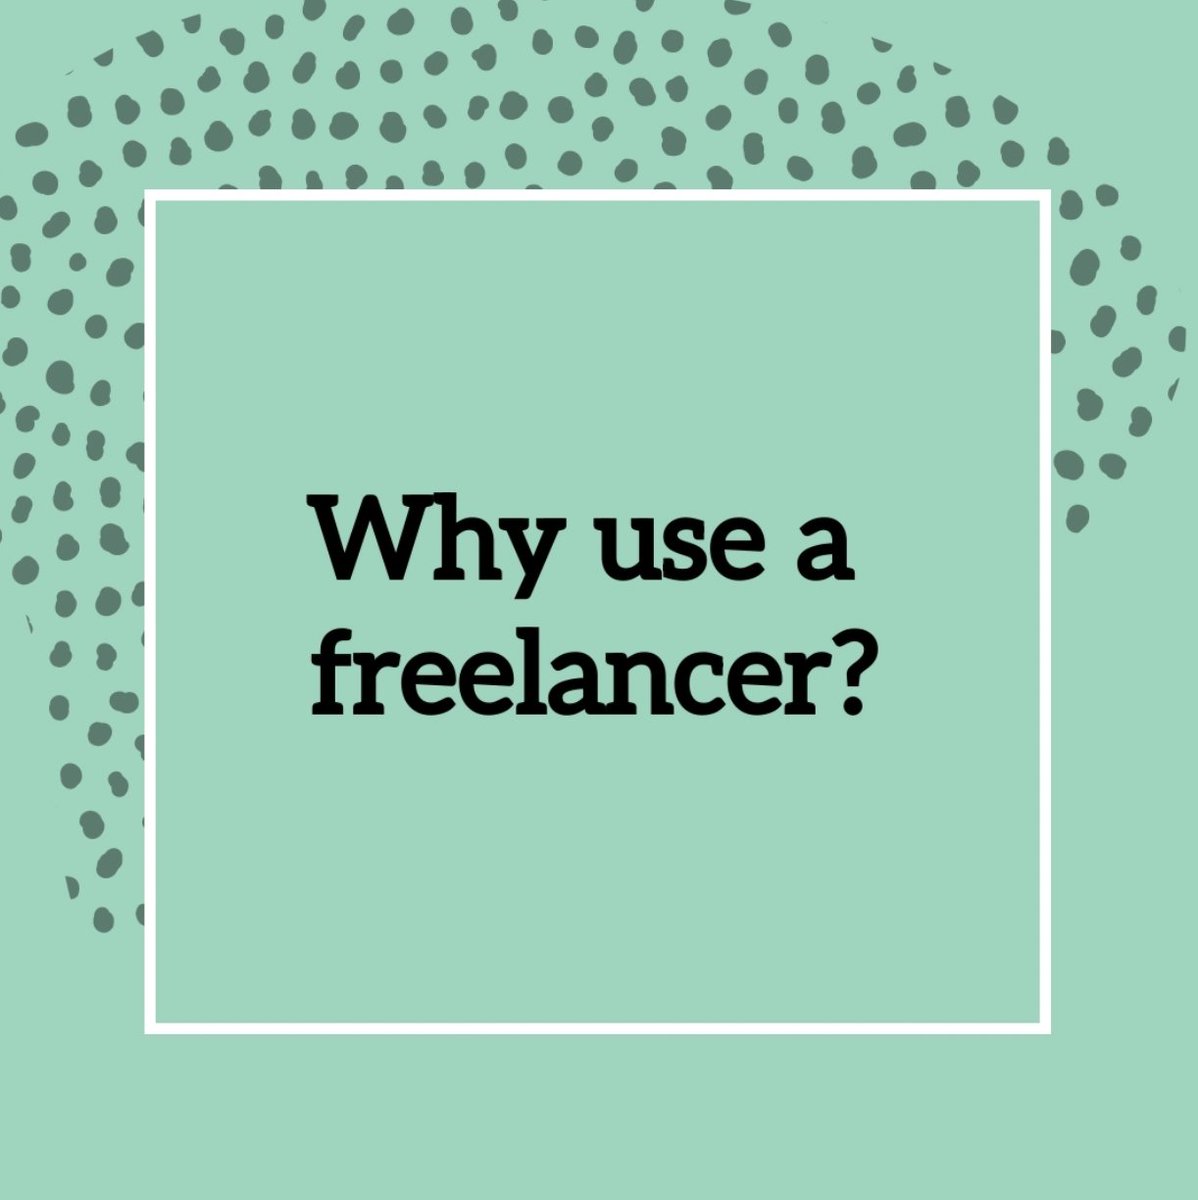 Why use a freelancer? A freelancer can help you with specific areas - such as PR or copywriting (👋 Hi there!) enabling you to spend time working on other business-critical projects 

#freelancer #freelancework #pr #communications #copywriting #marketingcommunications